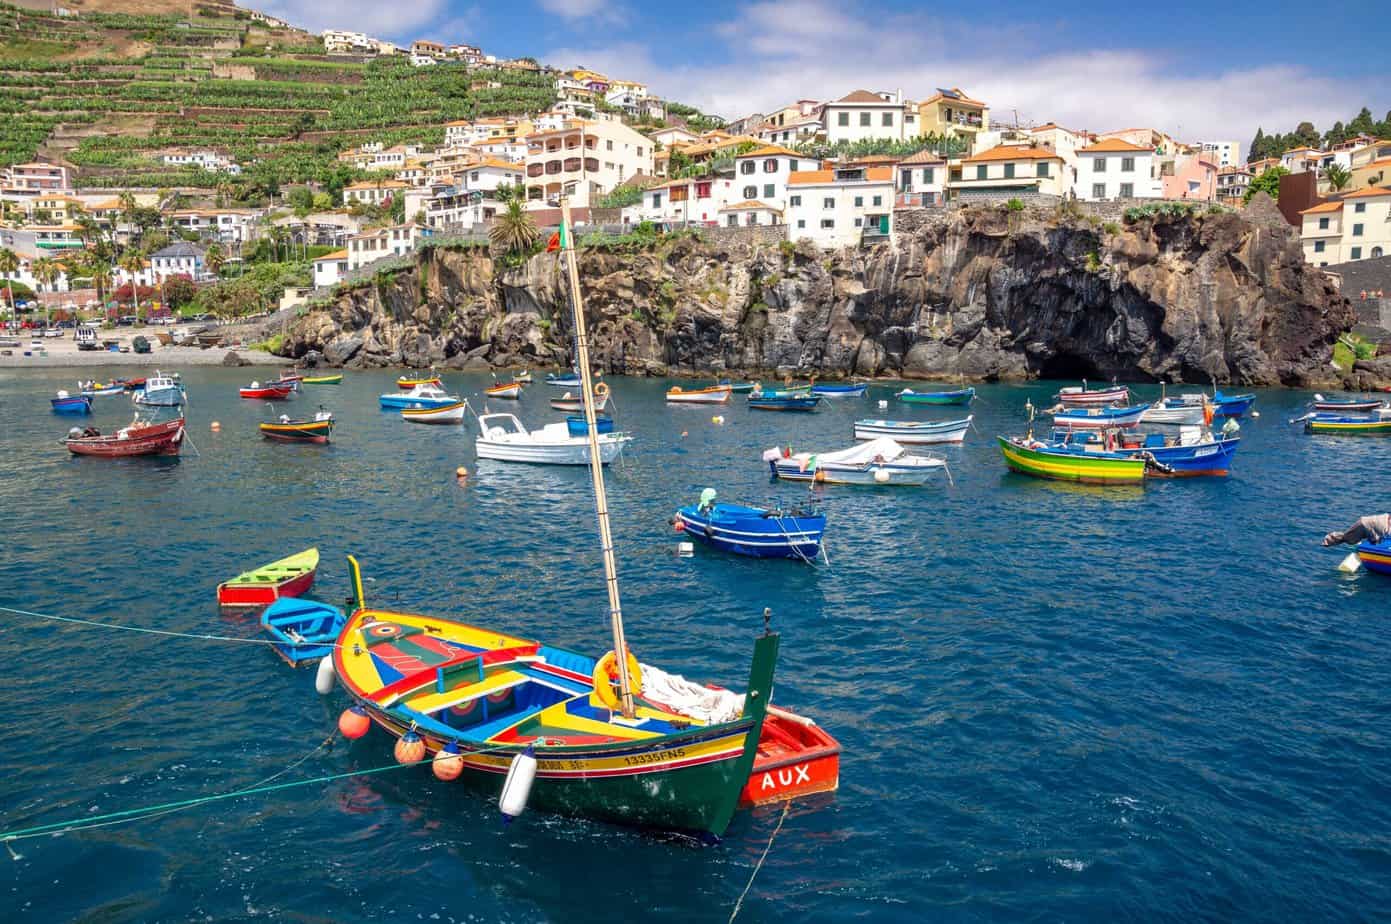 Colorful boats in the water in Madeira.